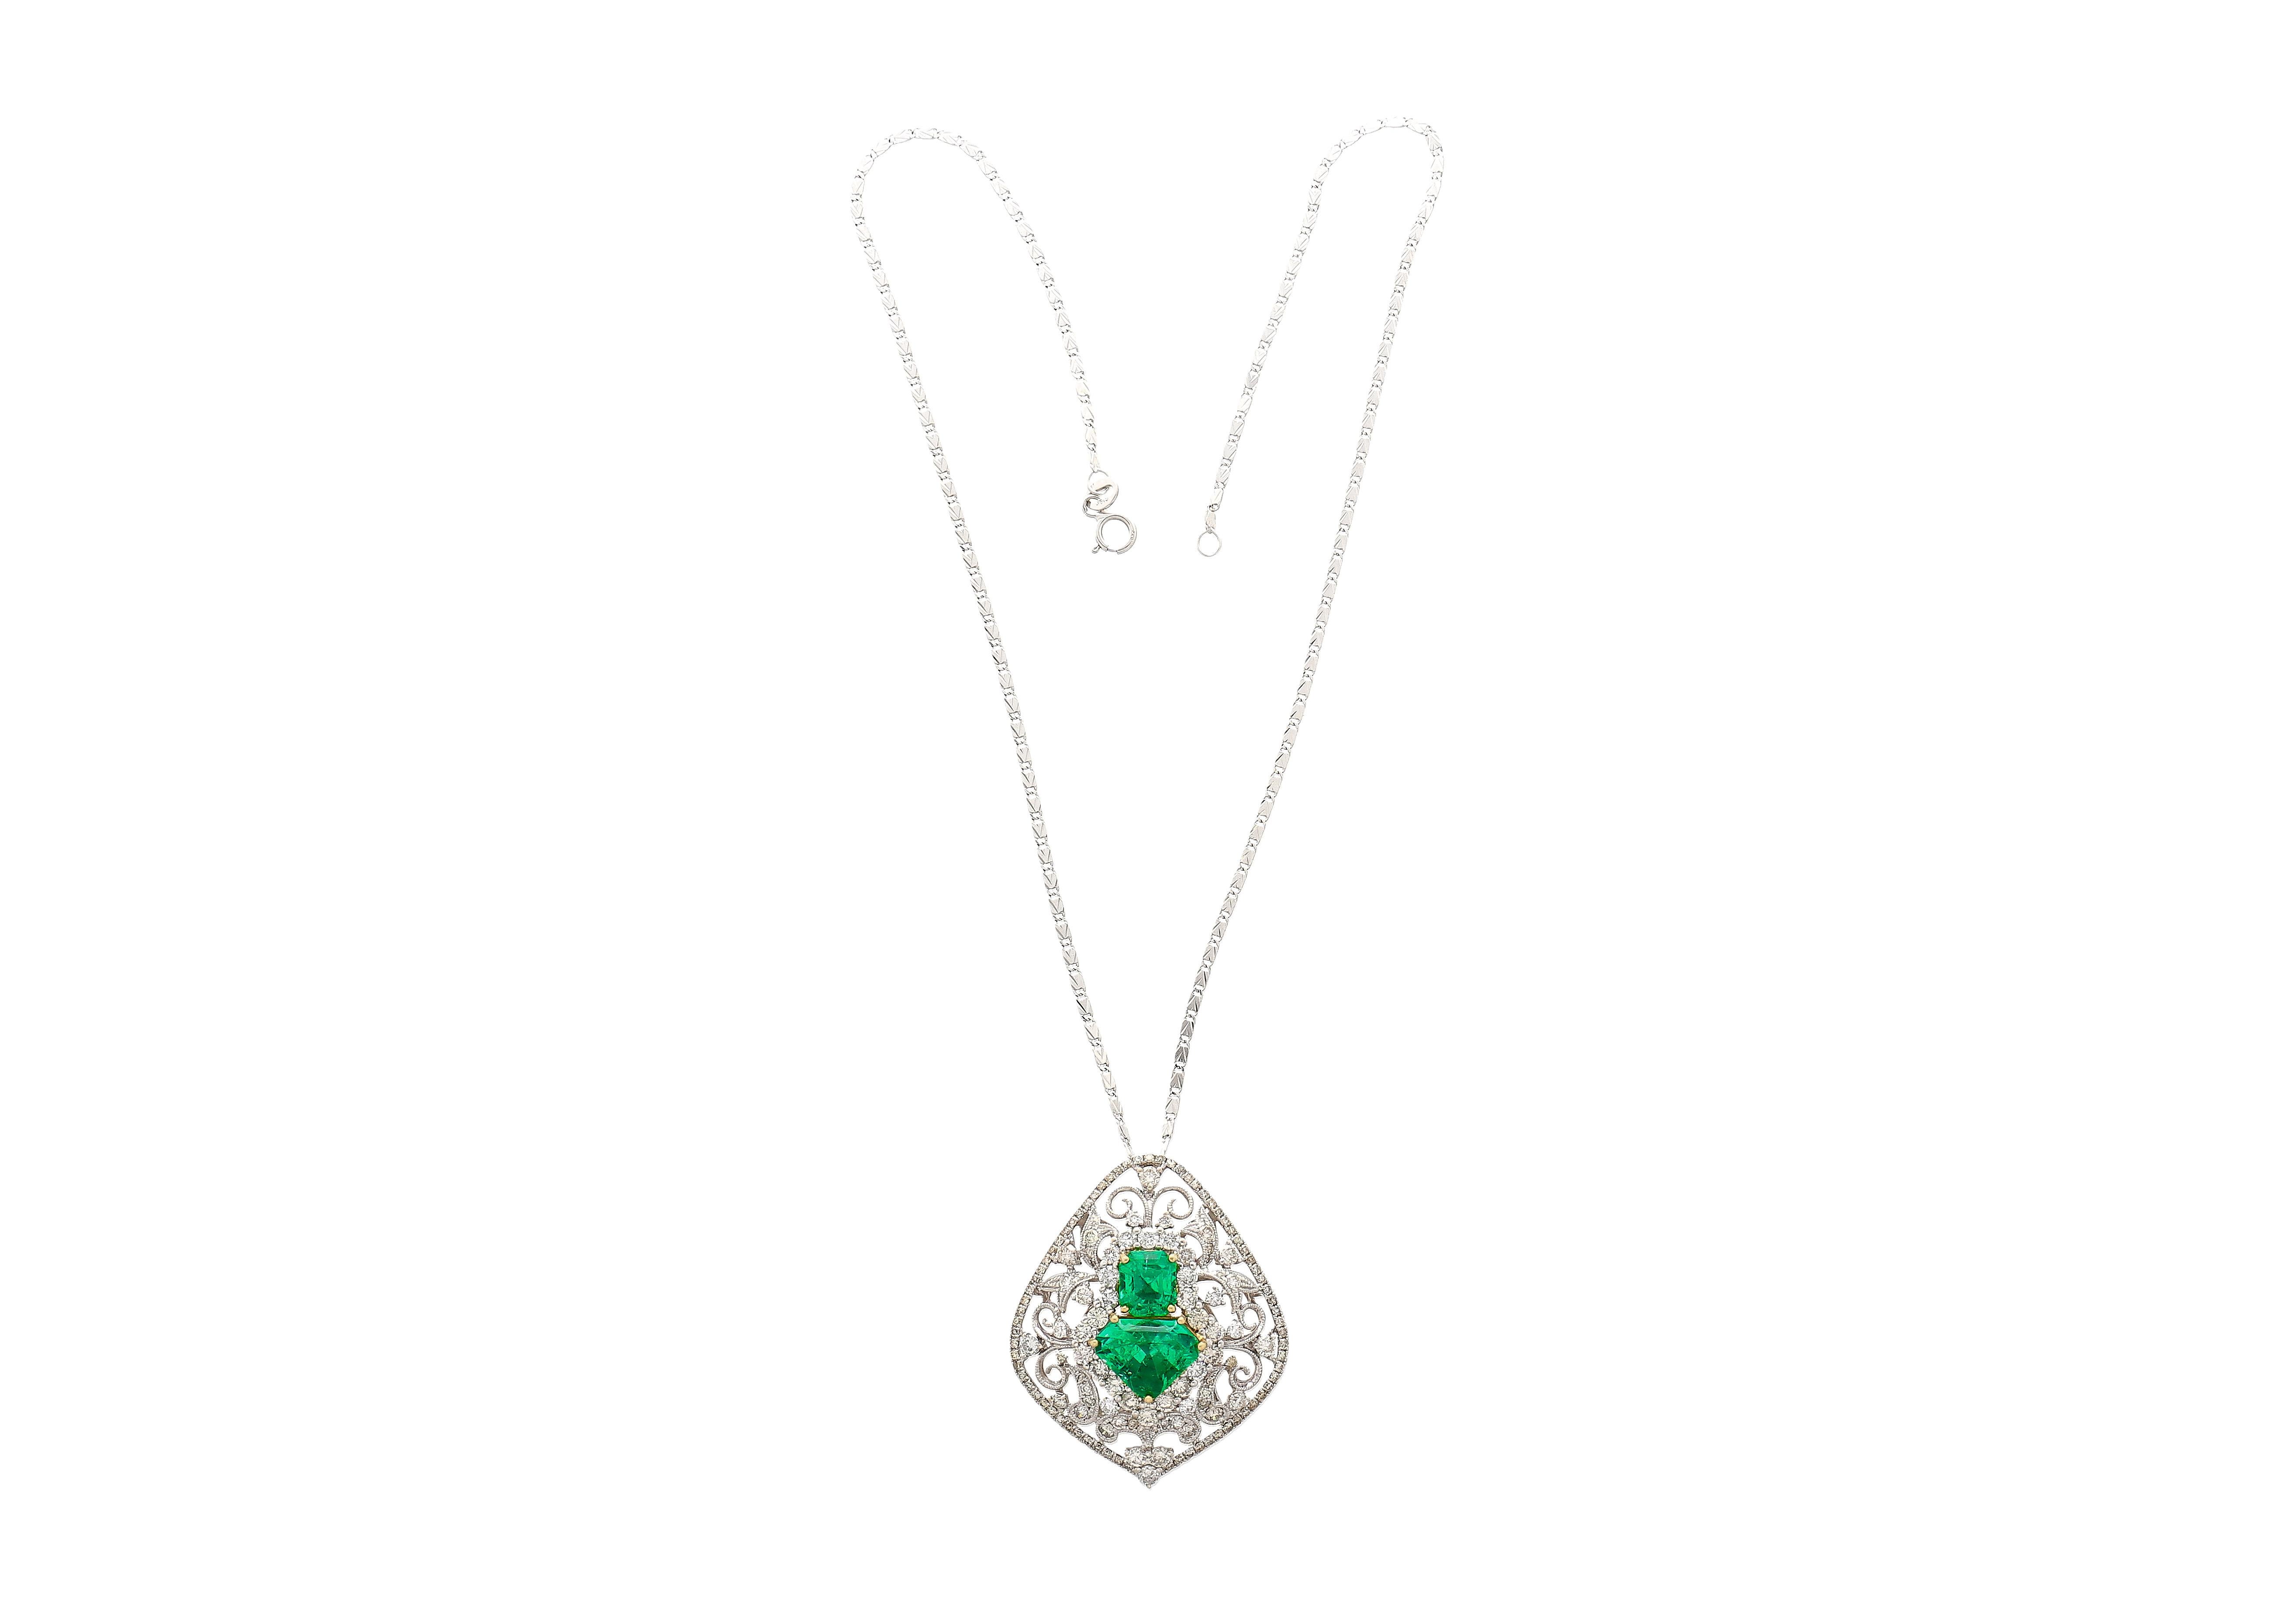 Vintage Carved 18K White Gold Pendant Necklace With Shield Cut Emeralds For Sale 1